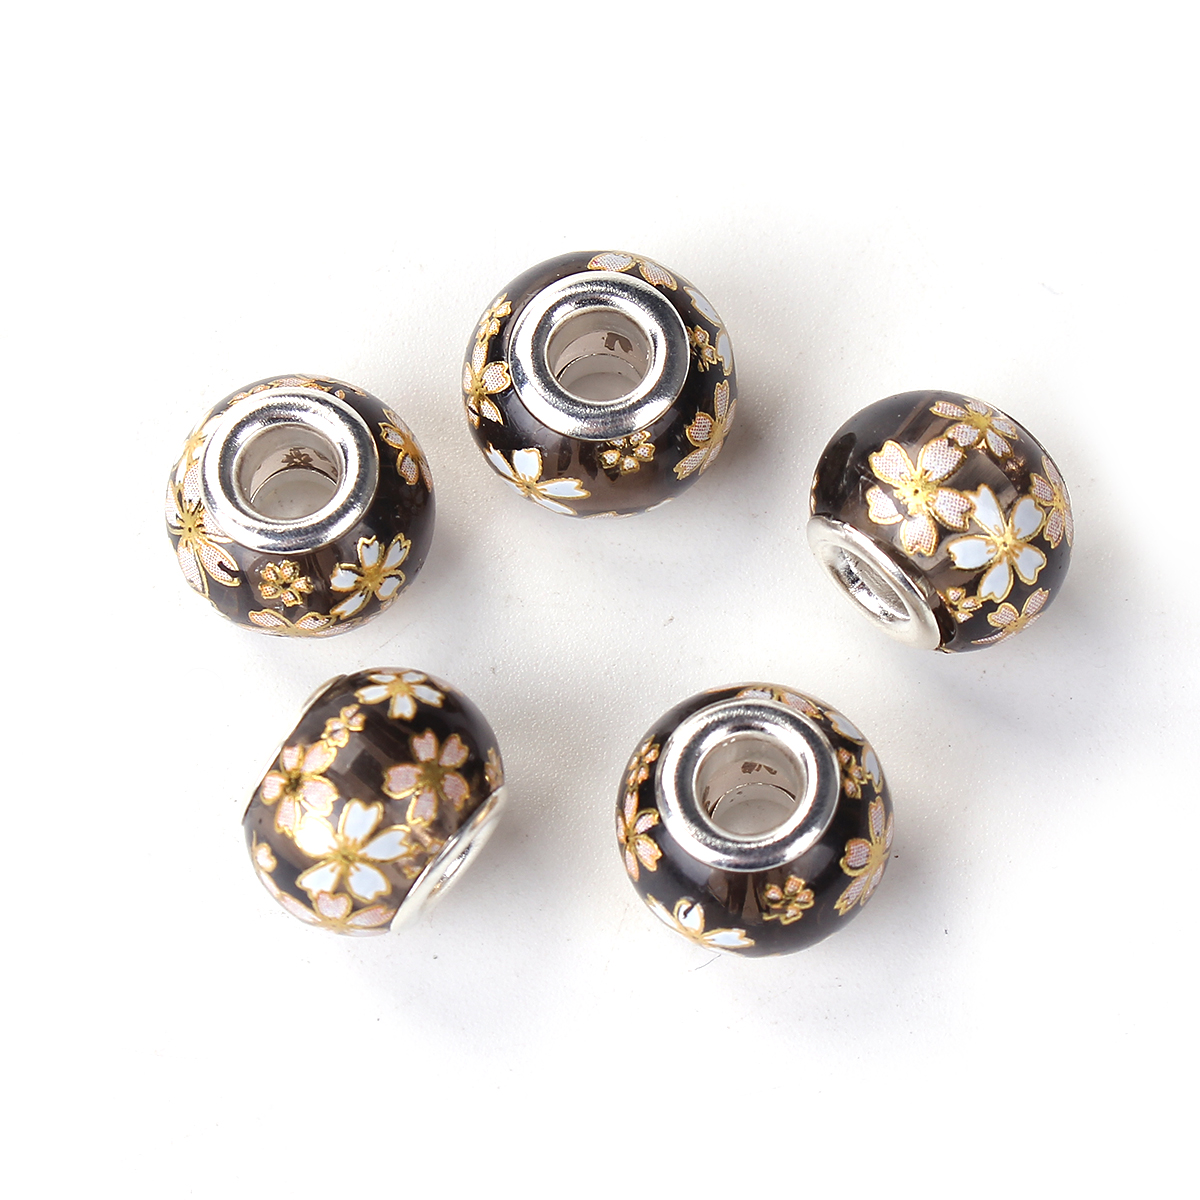 Picture of Glass Japan Painting Vintage Japanese Tensha European Style Large Hole Charm Beads Round Silver Plated Sakura Flower Black Transparent About 14mm( 4/8") Dia, Hole: Approx 4.7mm, 5 PCs